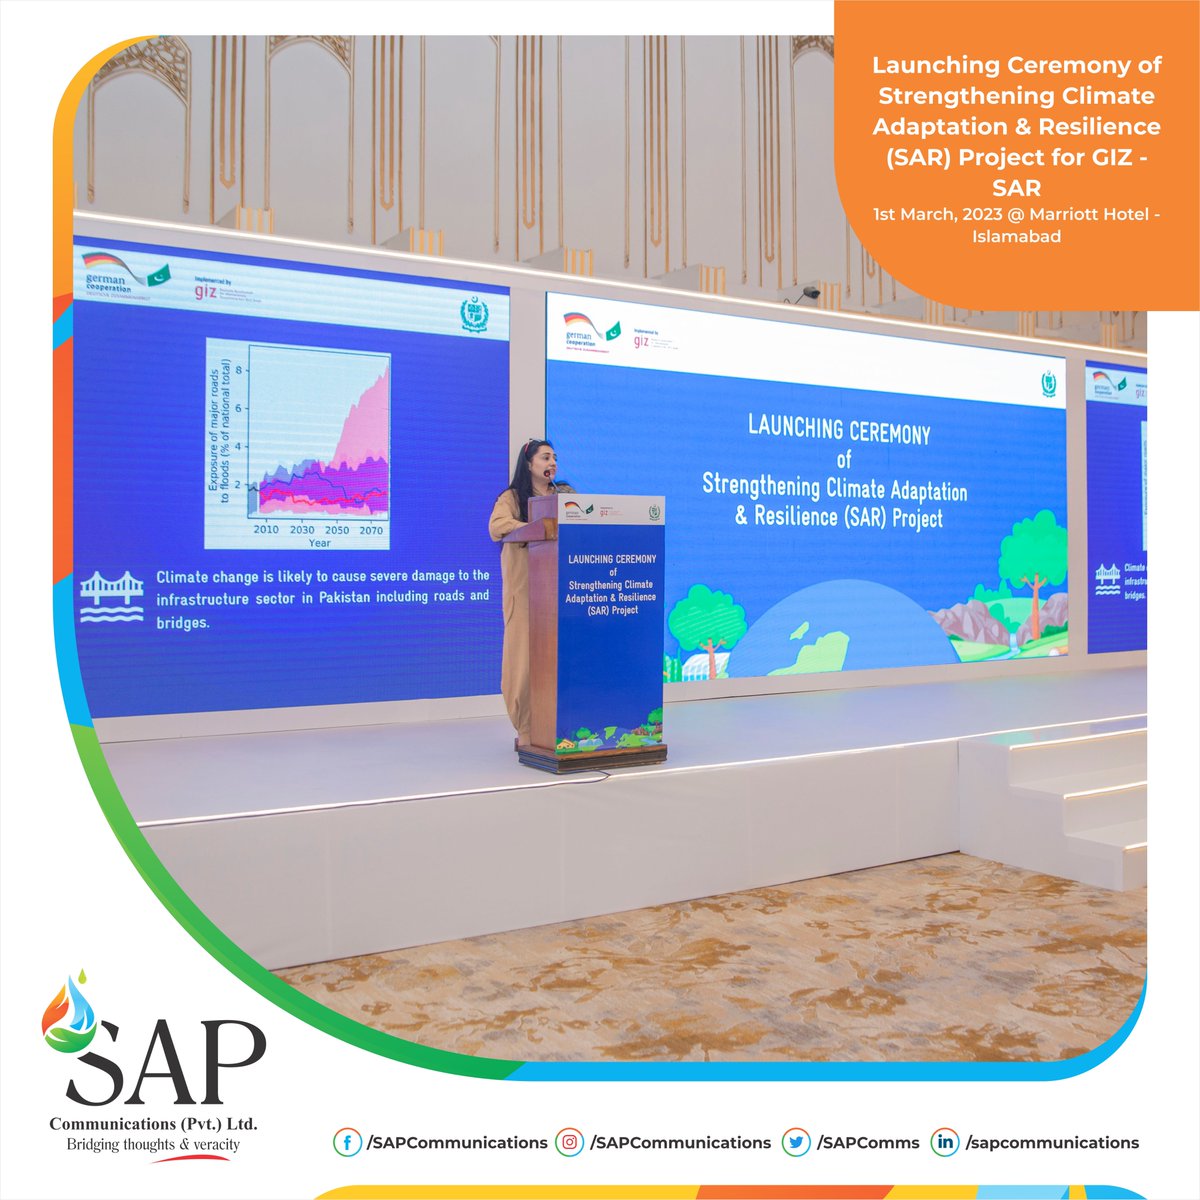 Presenting ‘Launching Ceremony of Strengthening Climate Adaptation & Resilience (SAR) Project for GIZ – SAR’ on 1st March, 2023 @ Marriott, Isb.
#LaunchingCeremony #StrengtheningClimateAdaptation #ClimateResilience #SAR #GIZ #Marriott #IslamabadEvents #SAPCommunications #SAP